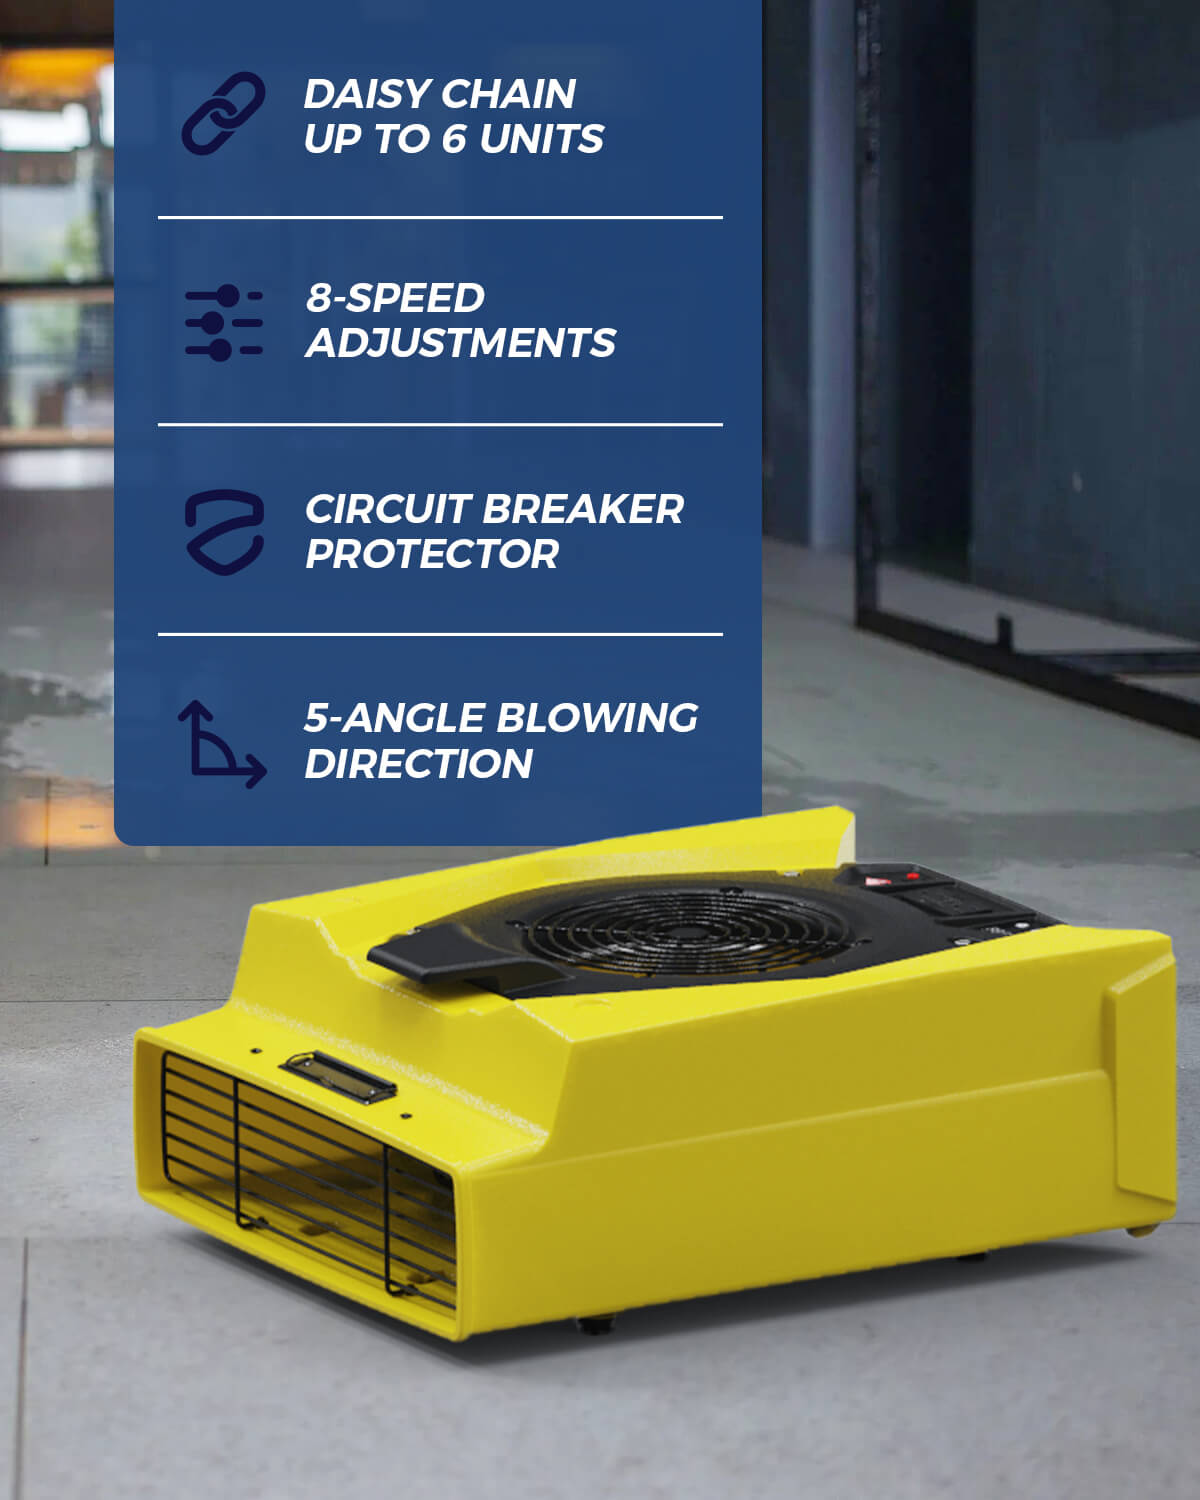 AlorAir Zeus 900 Air Mover Commercial Blower for Carpets, Walls, Plumbing Use, Variable Speed Floor Blower Fan, 950 CFM with 1.8 Amps,Circuit Breaker Protection,on-Board Duplex GFCI AlorAir